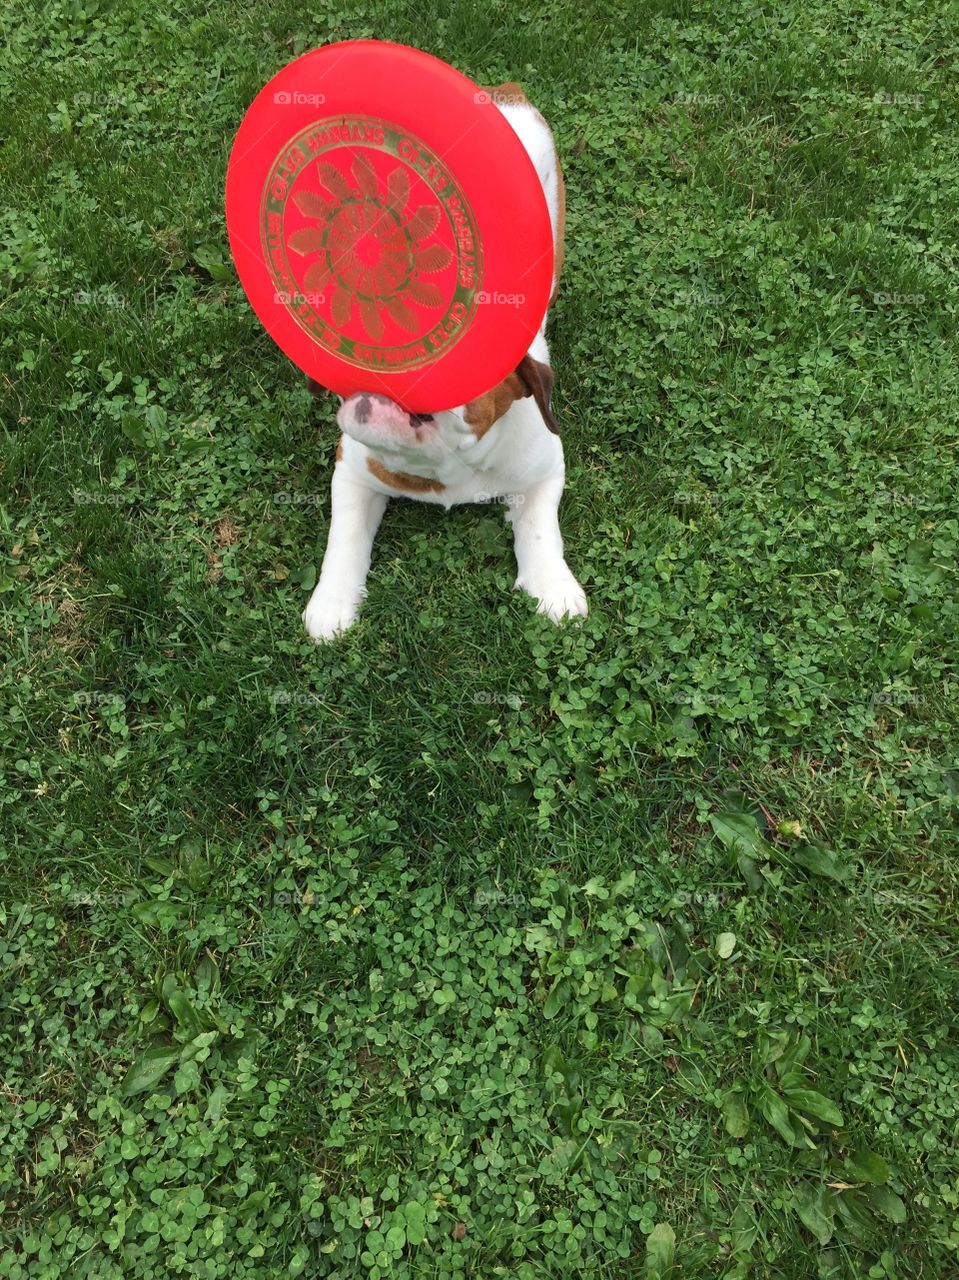 She loves to play frisbee